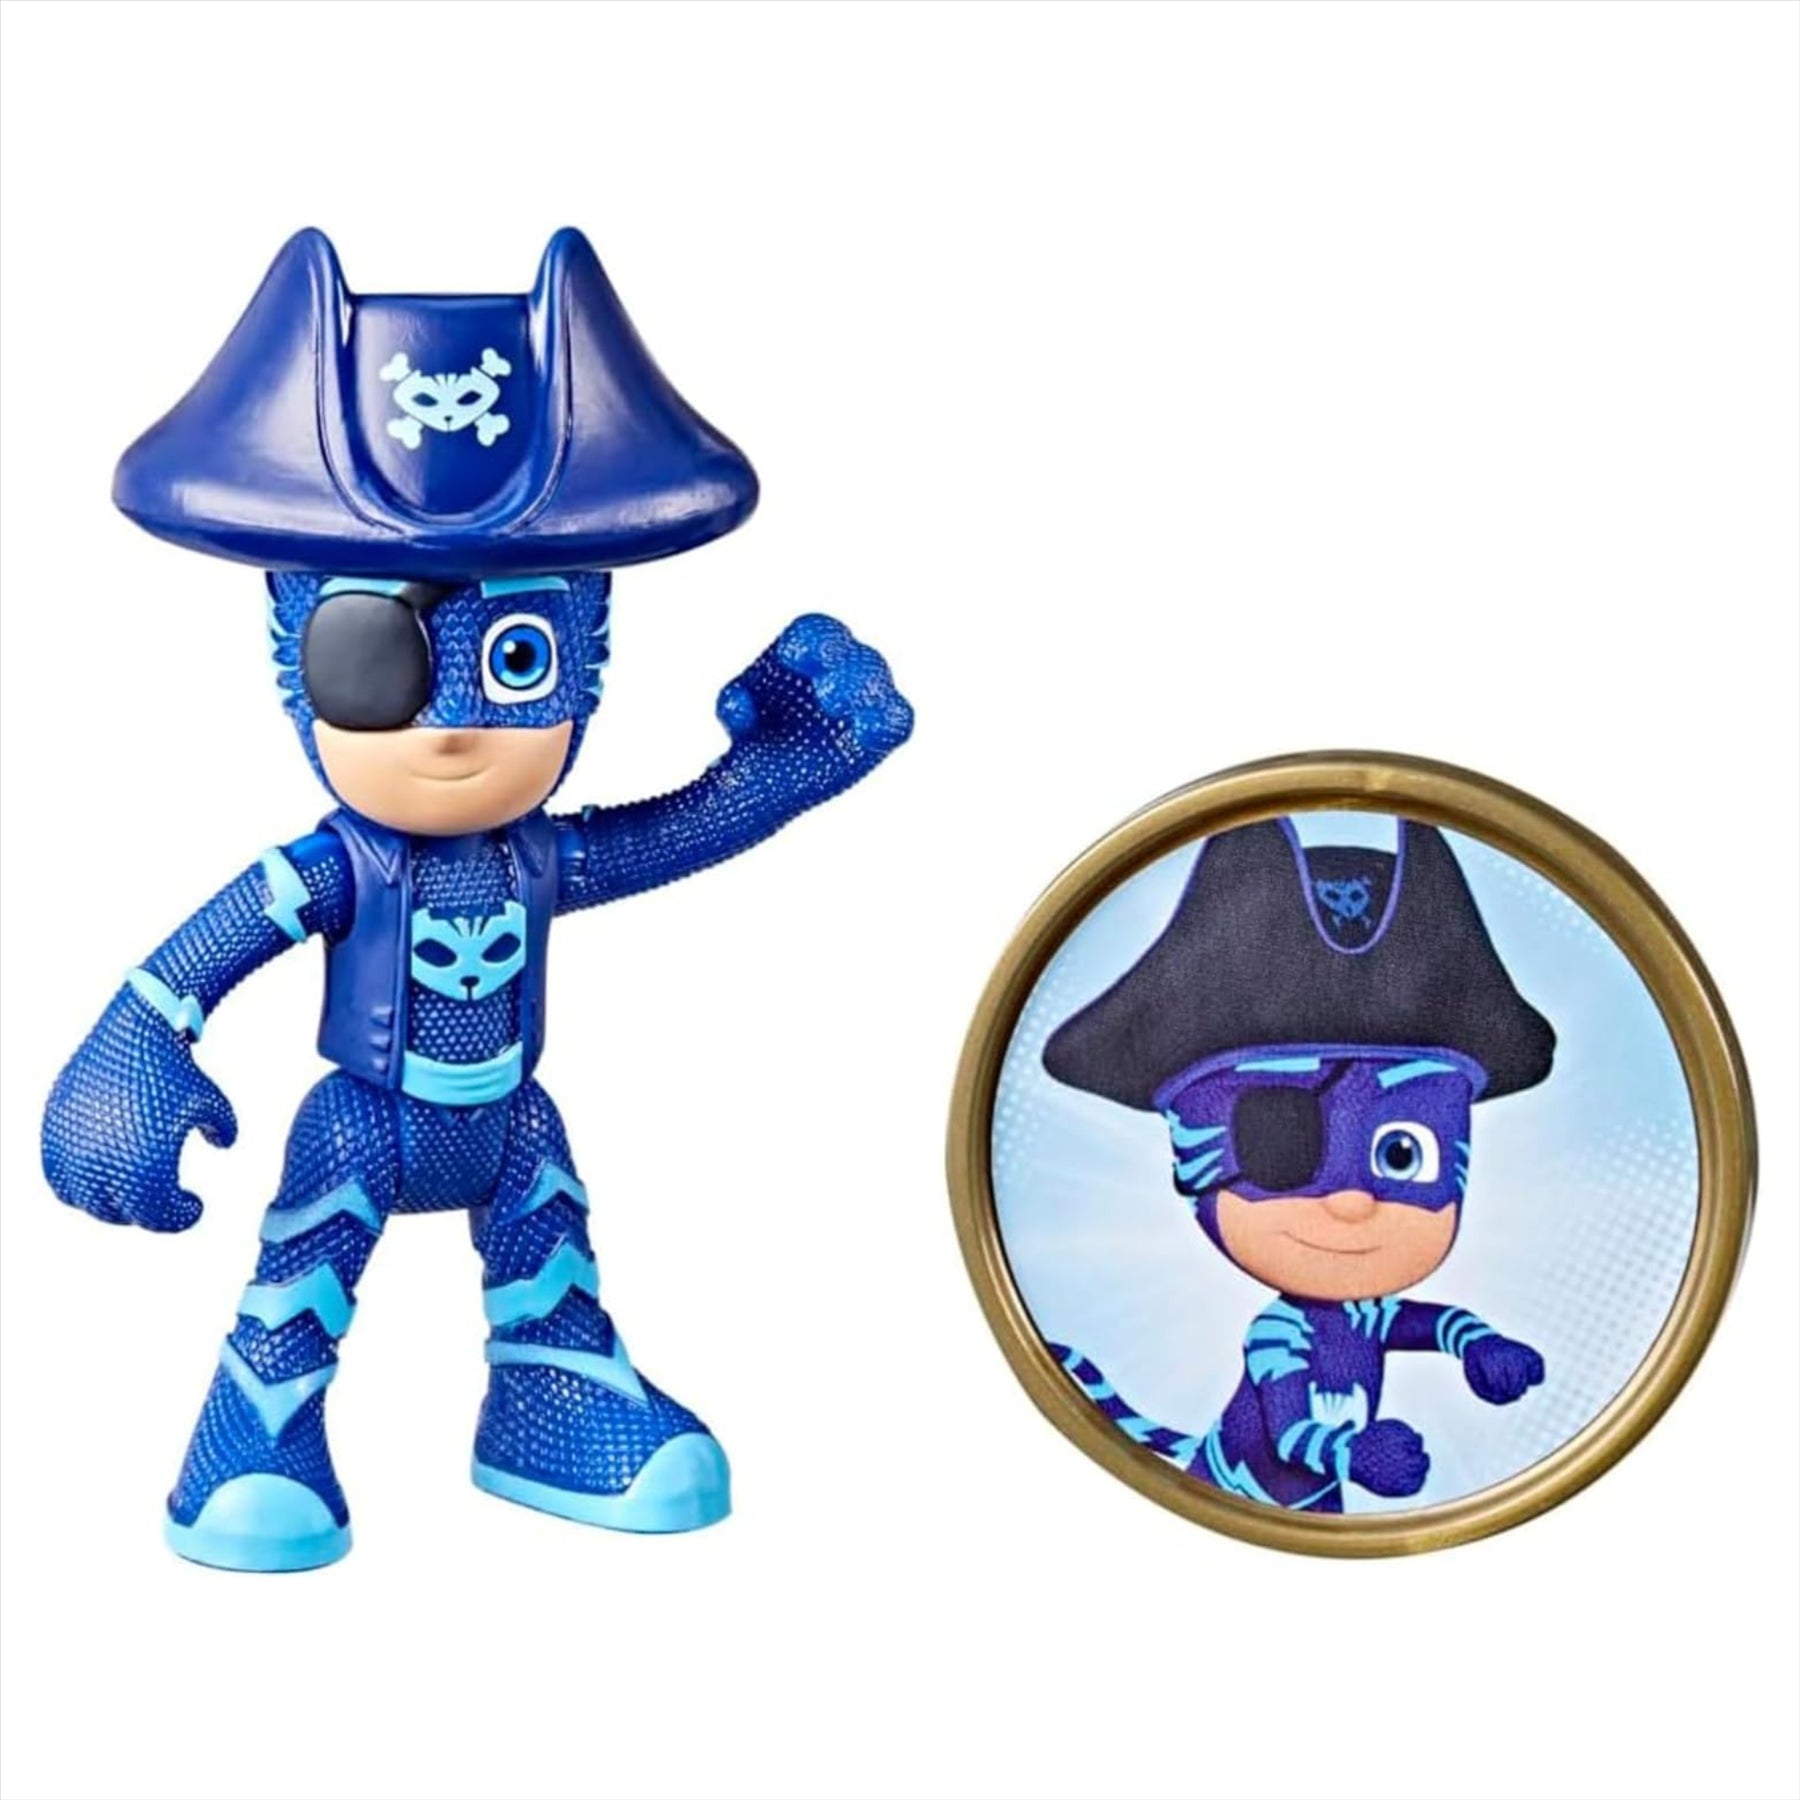 PJ Masks Articulated Play Figures and Accessories Blind Box Sets - 2x Pirate Power Blind Boxes - Toptoys2u